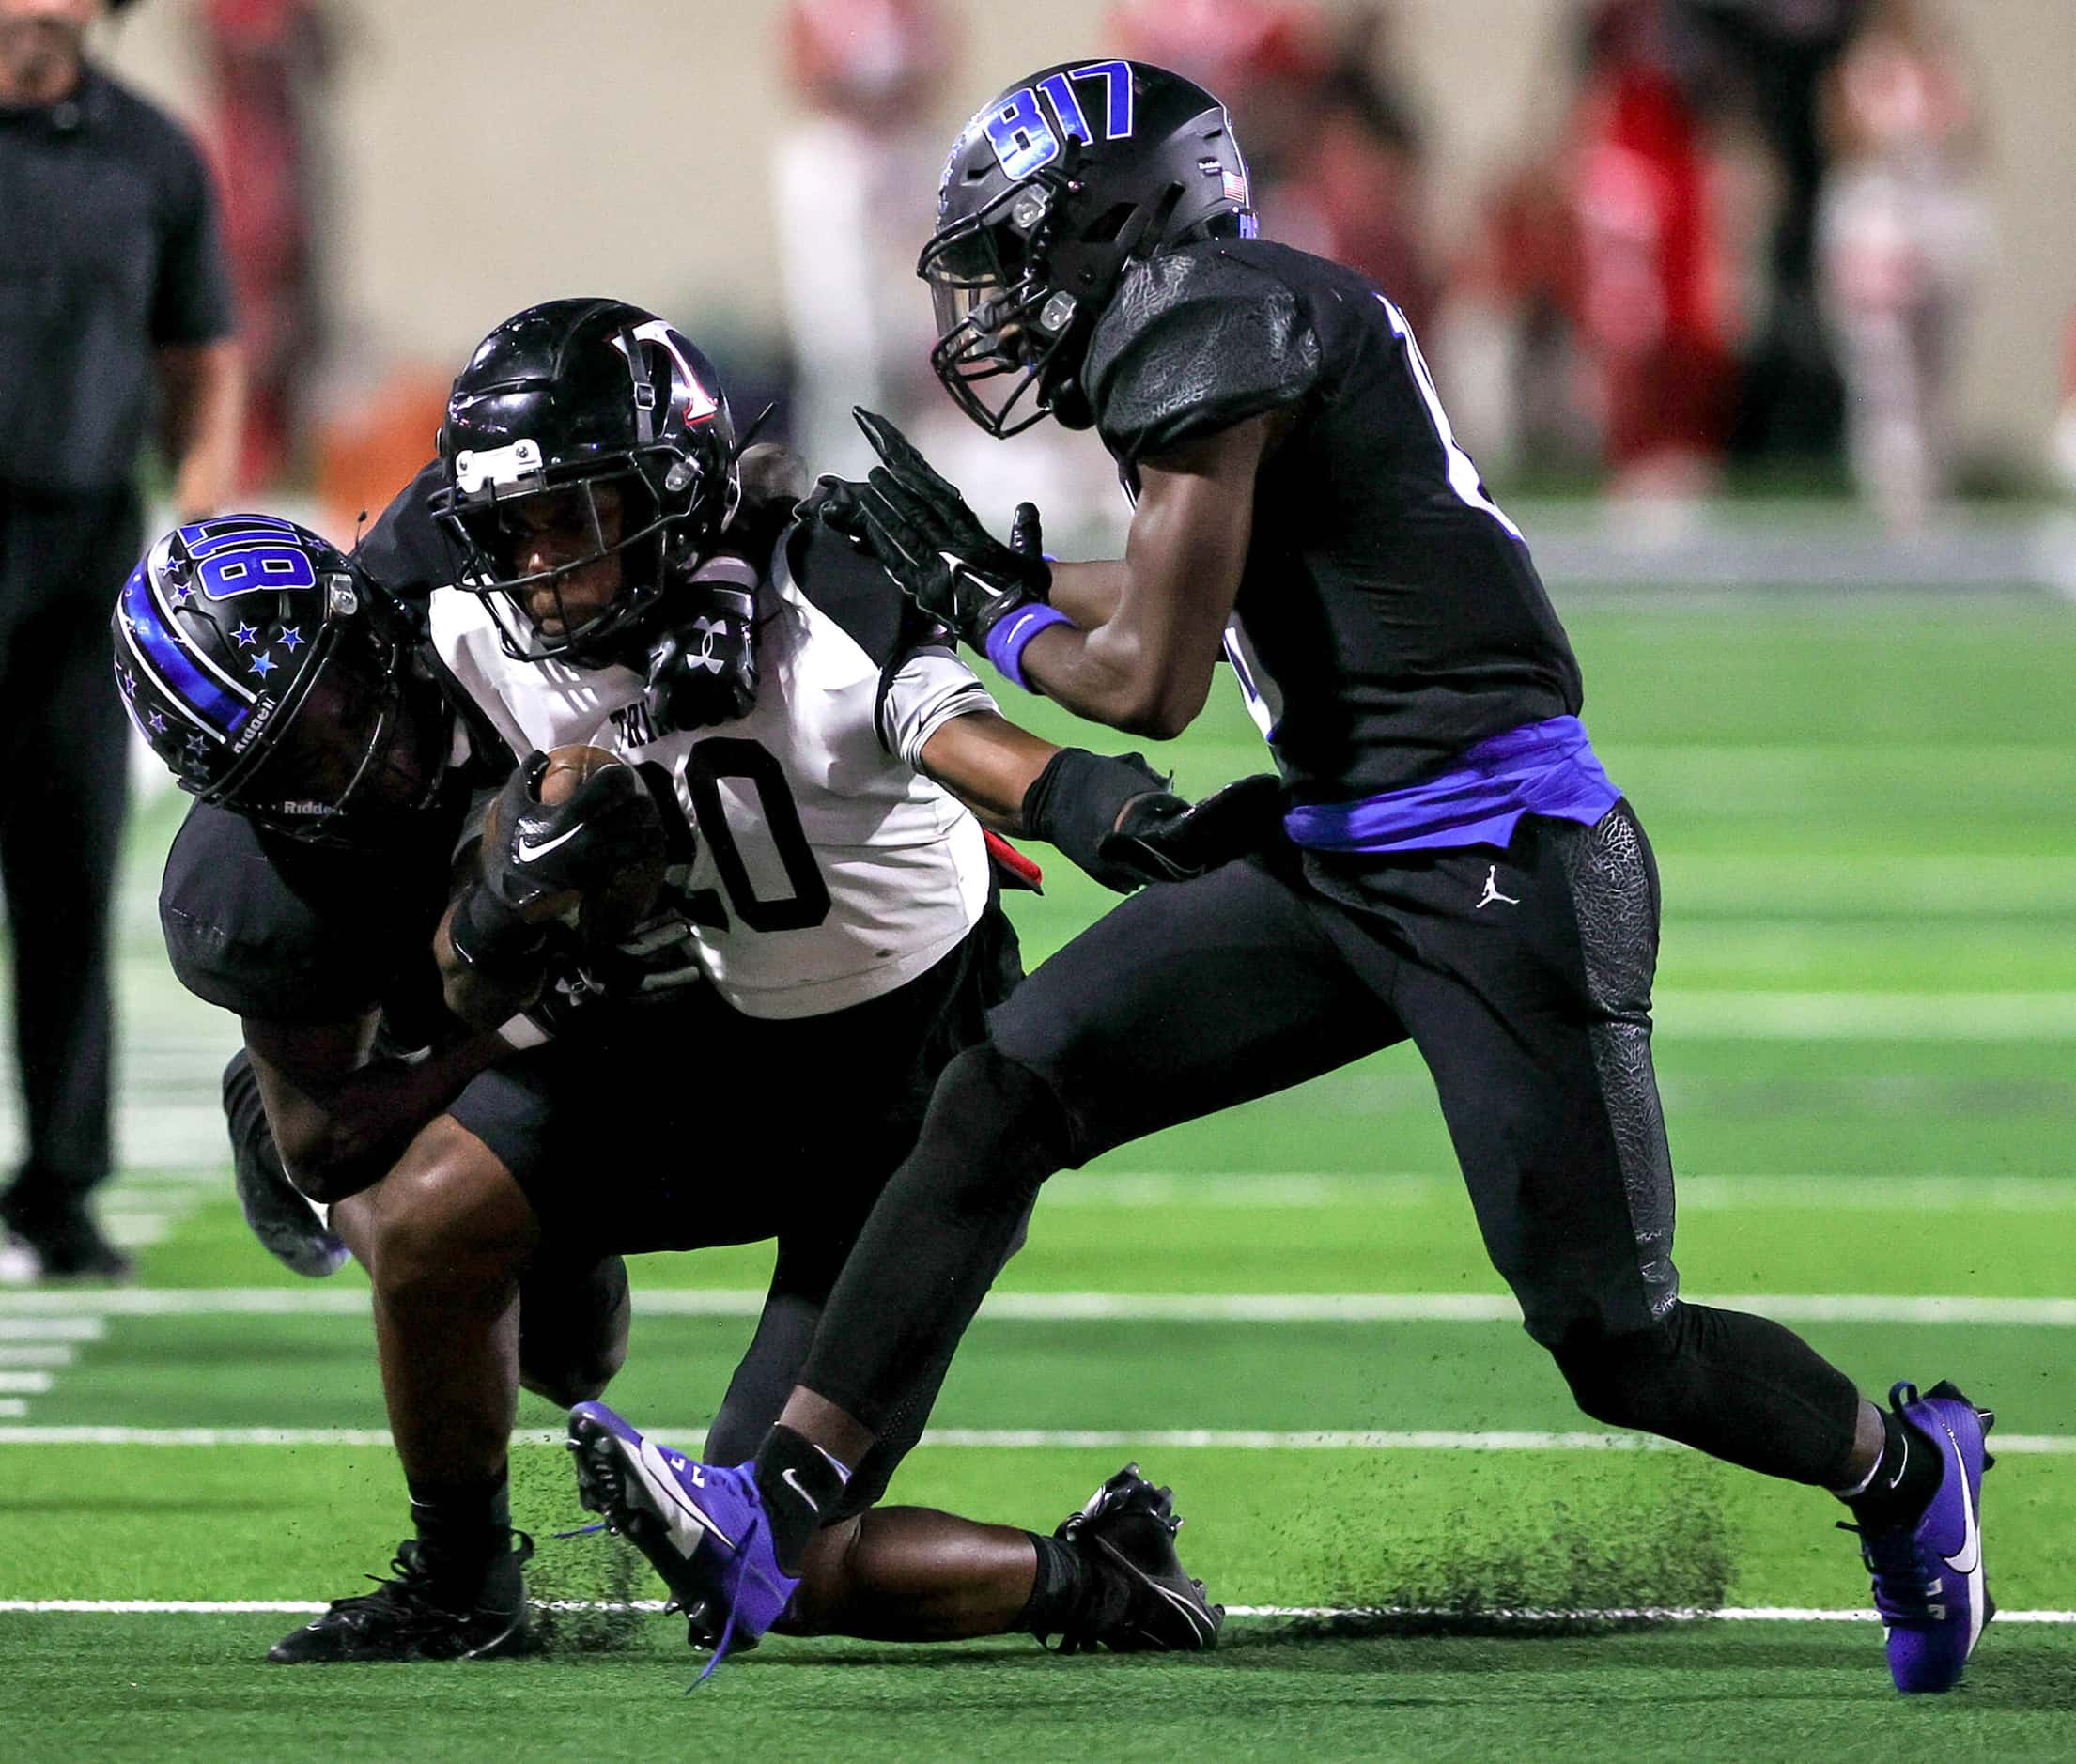 Euless Trinity running back Josh Bell (20) gets dragged down by North Crowley linebacker...